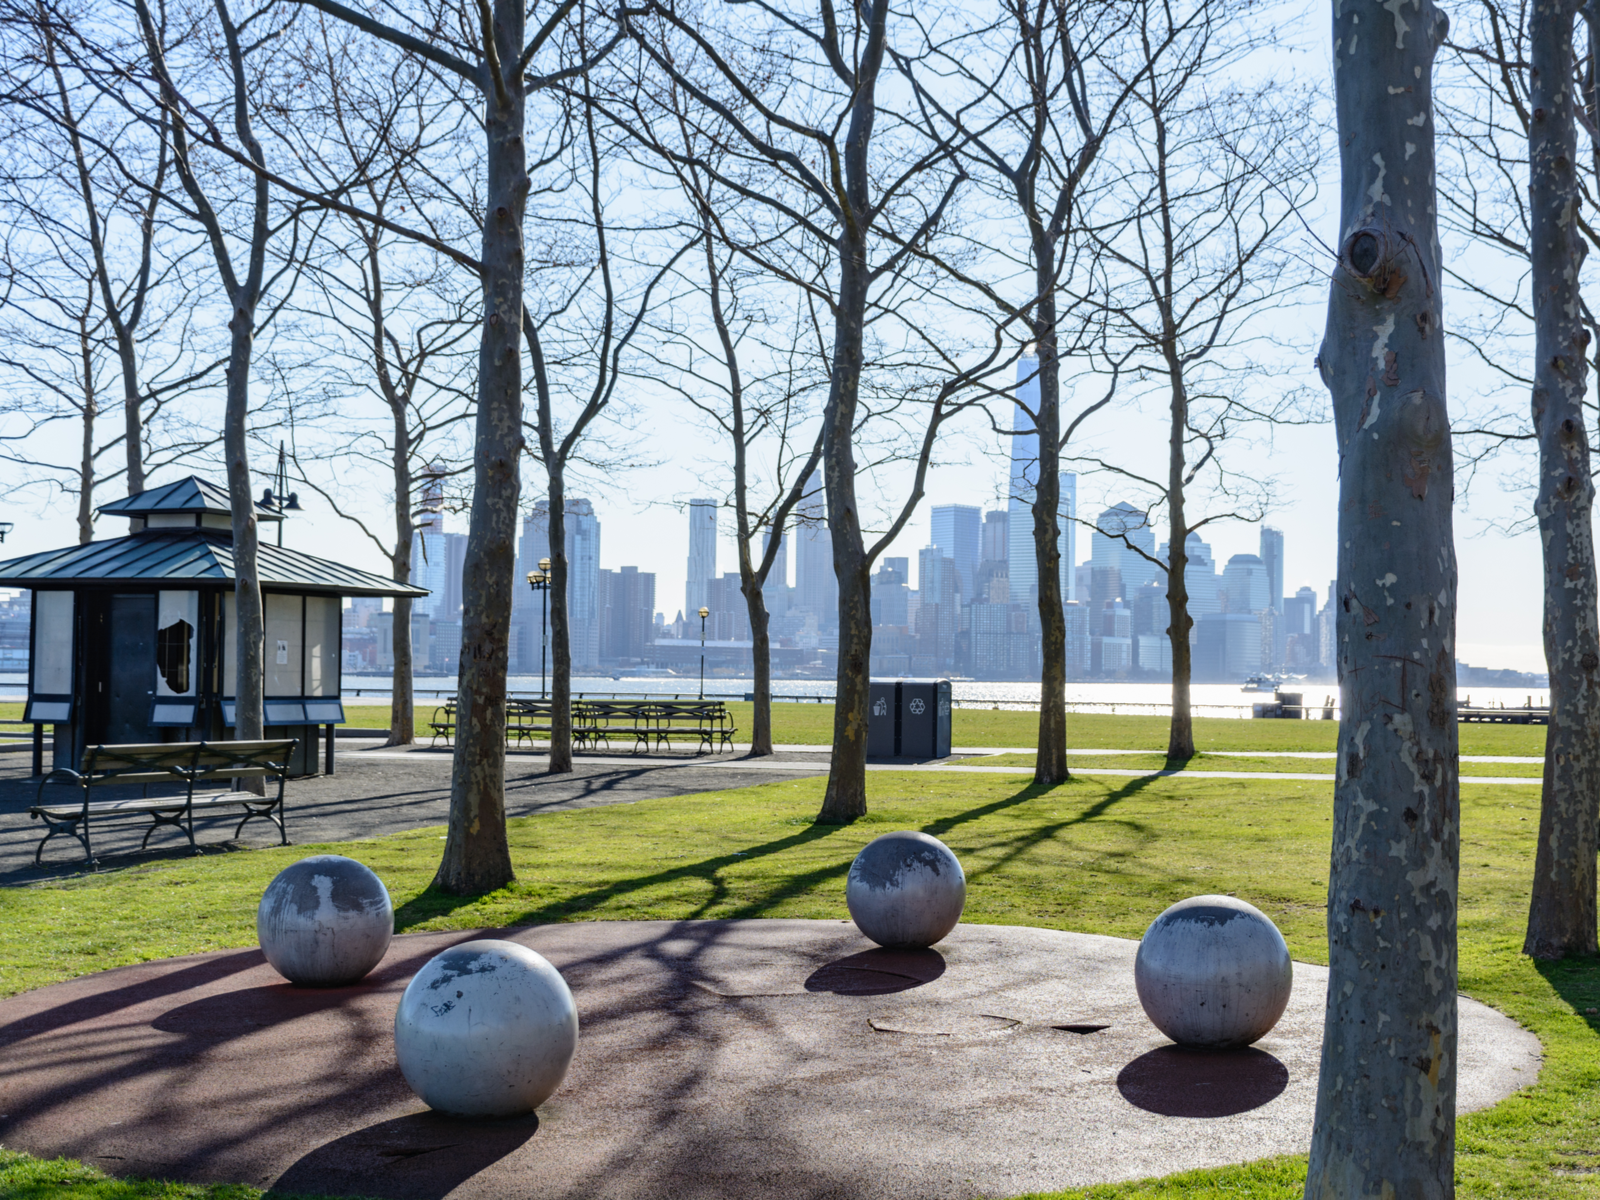 Four spherical objects, bare trees, empty benches, a small store stall, and a view of New York City at Liberty State Park during a fall season, having a picnic here is one of the best things to do in New Jersey